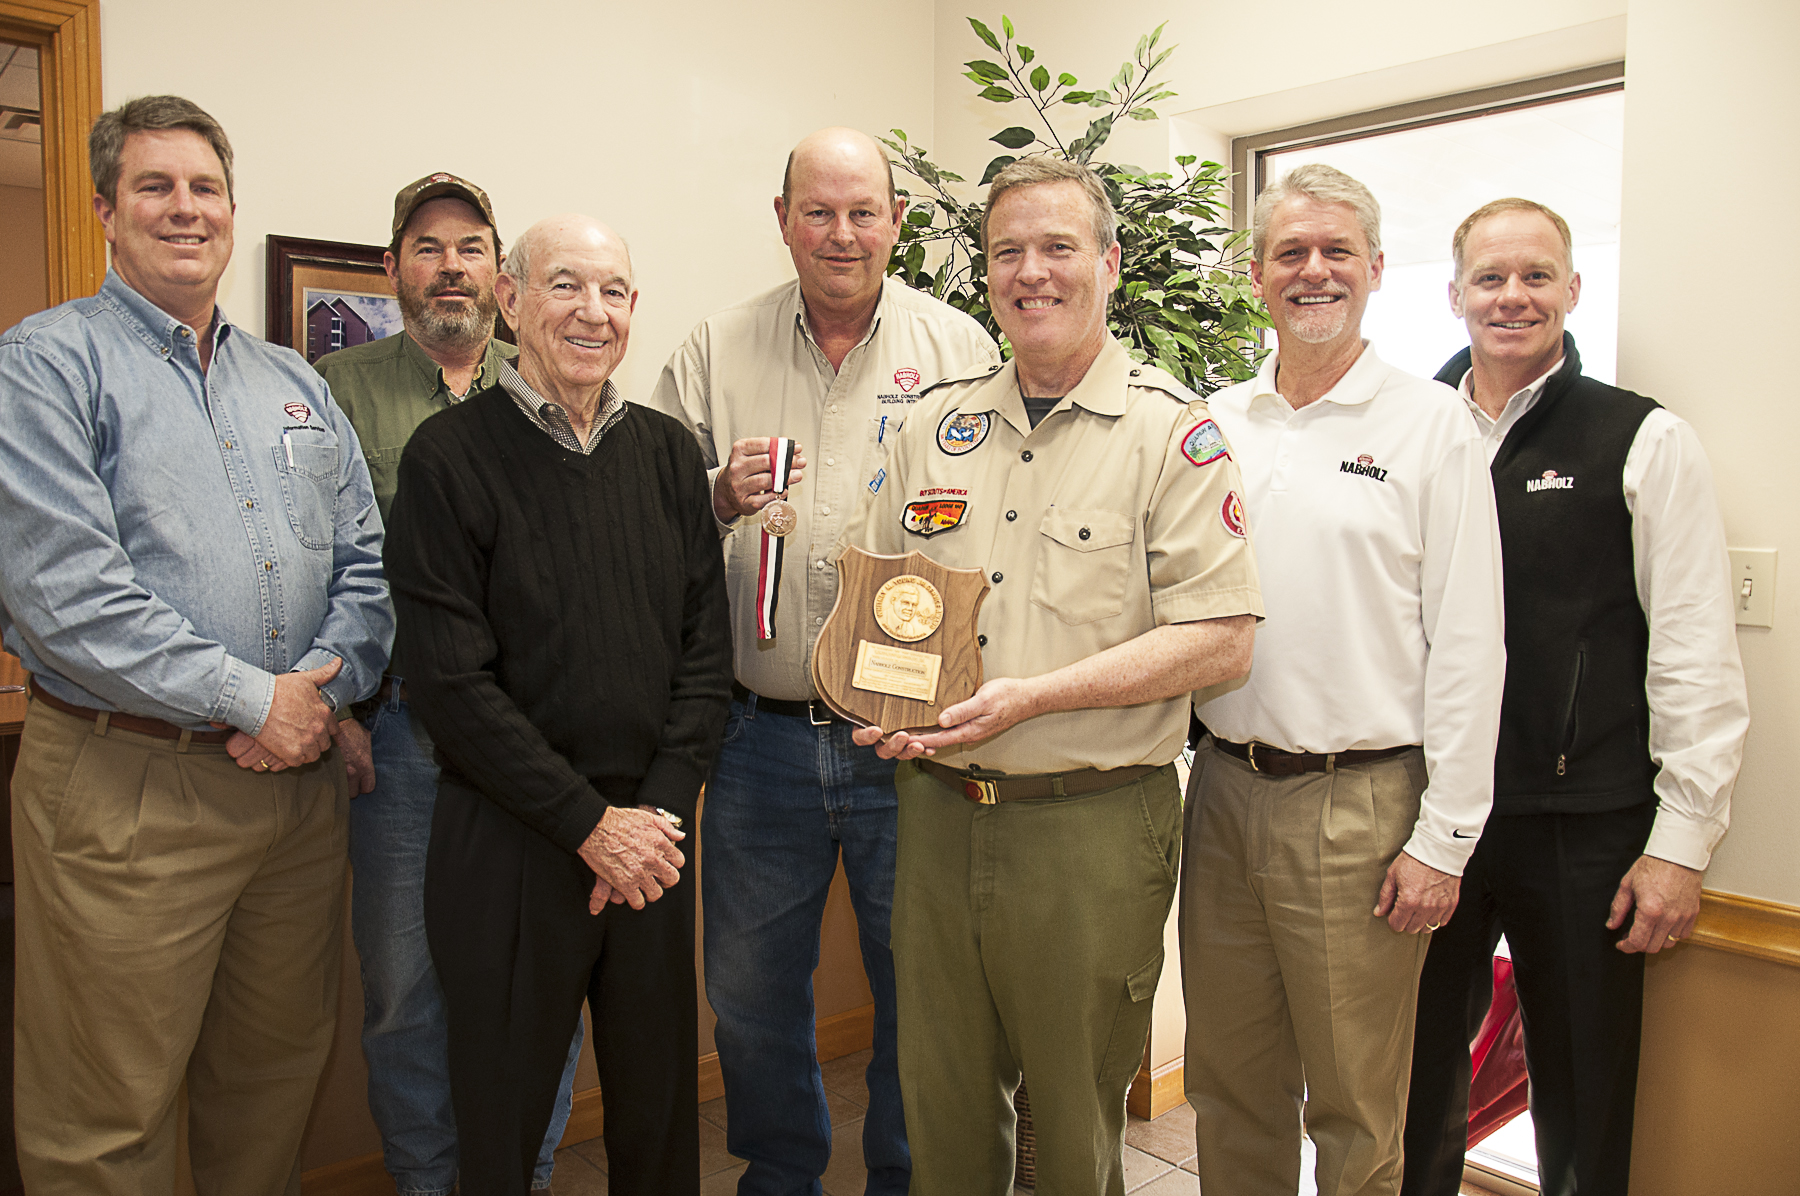 Members of the Nabholz Board accept the Whitney M. Young Jr. Service Award from Scout Executive John Carman